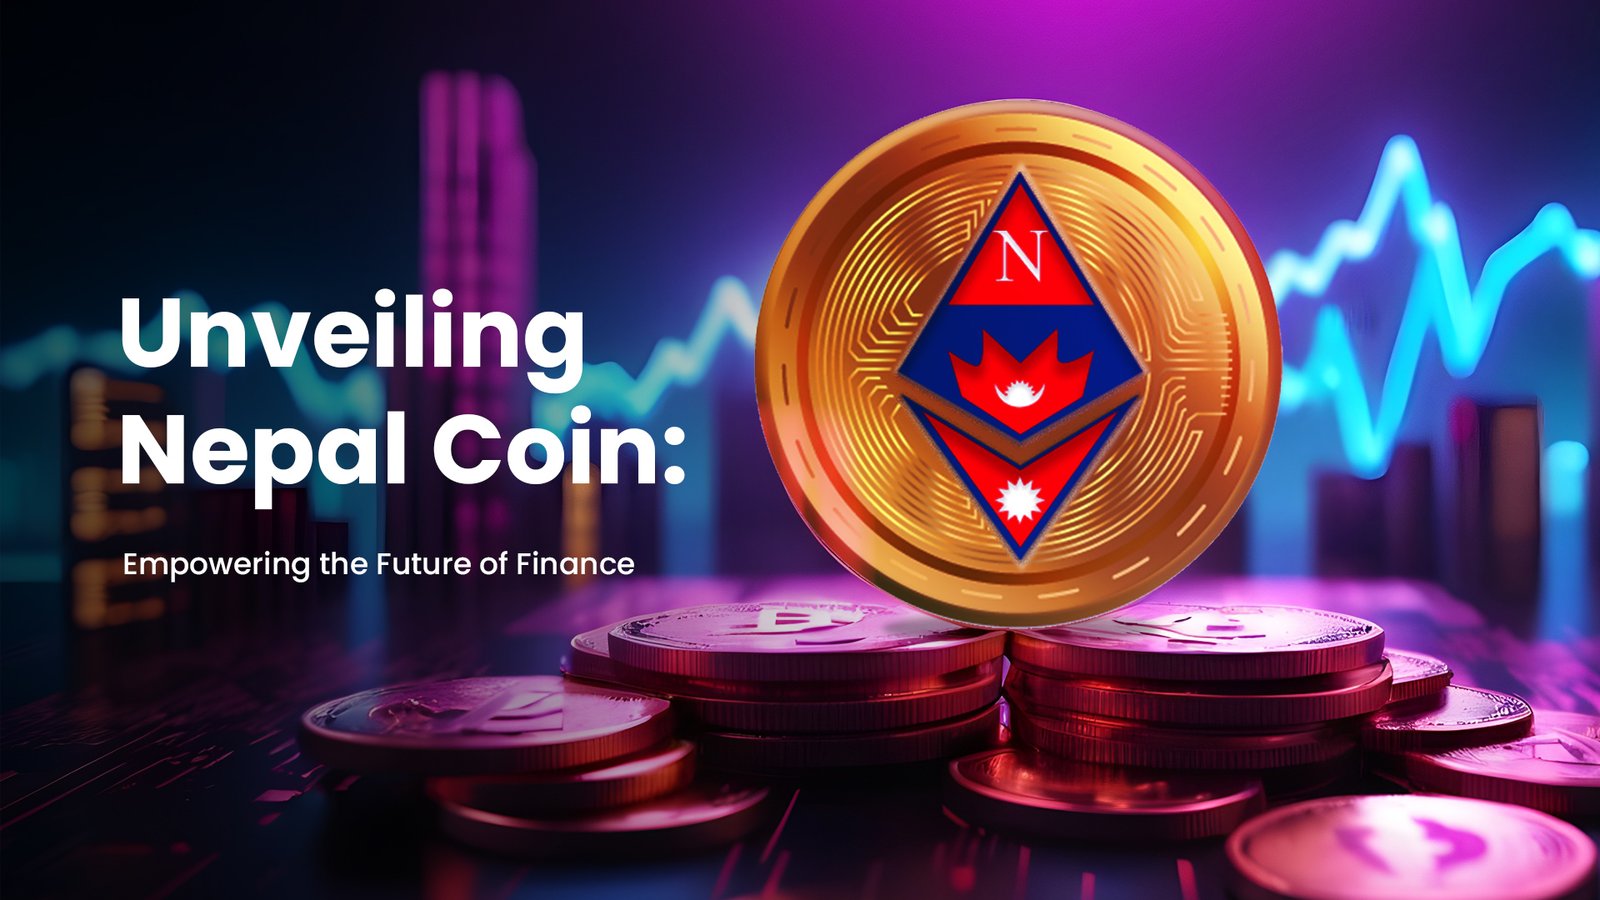 Unveiling Nepal Coin: Empowering the Future of Finance